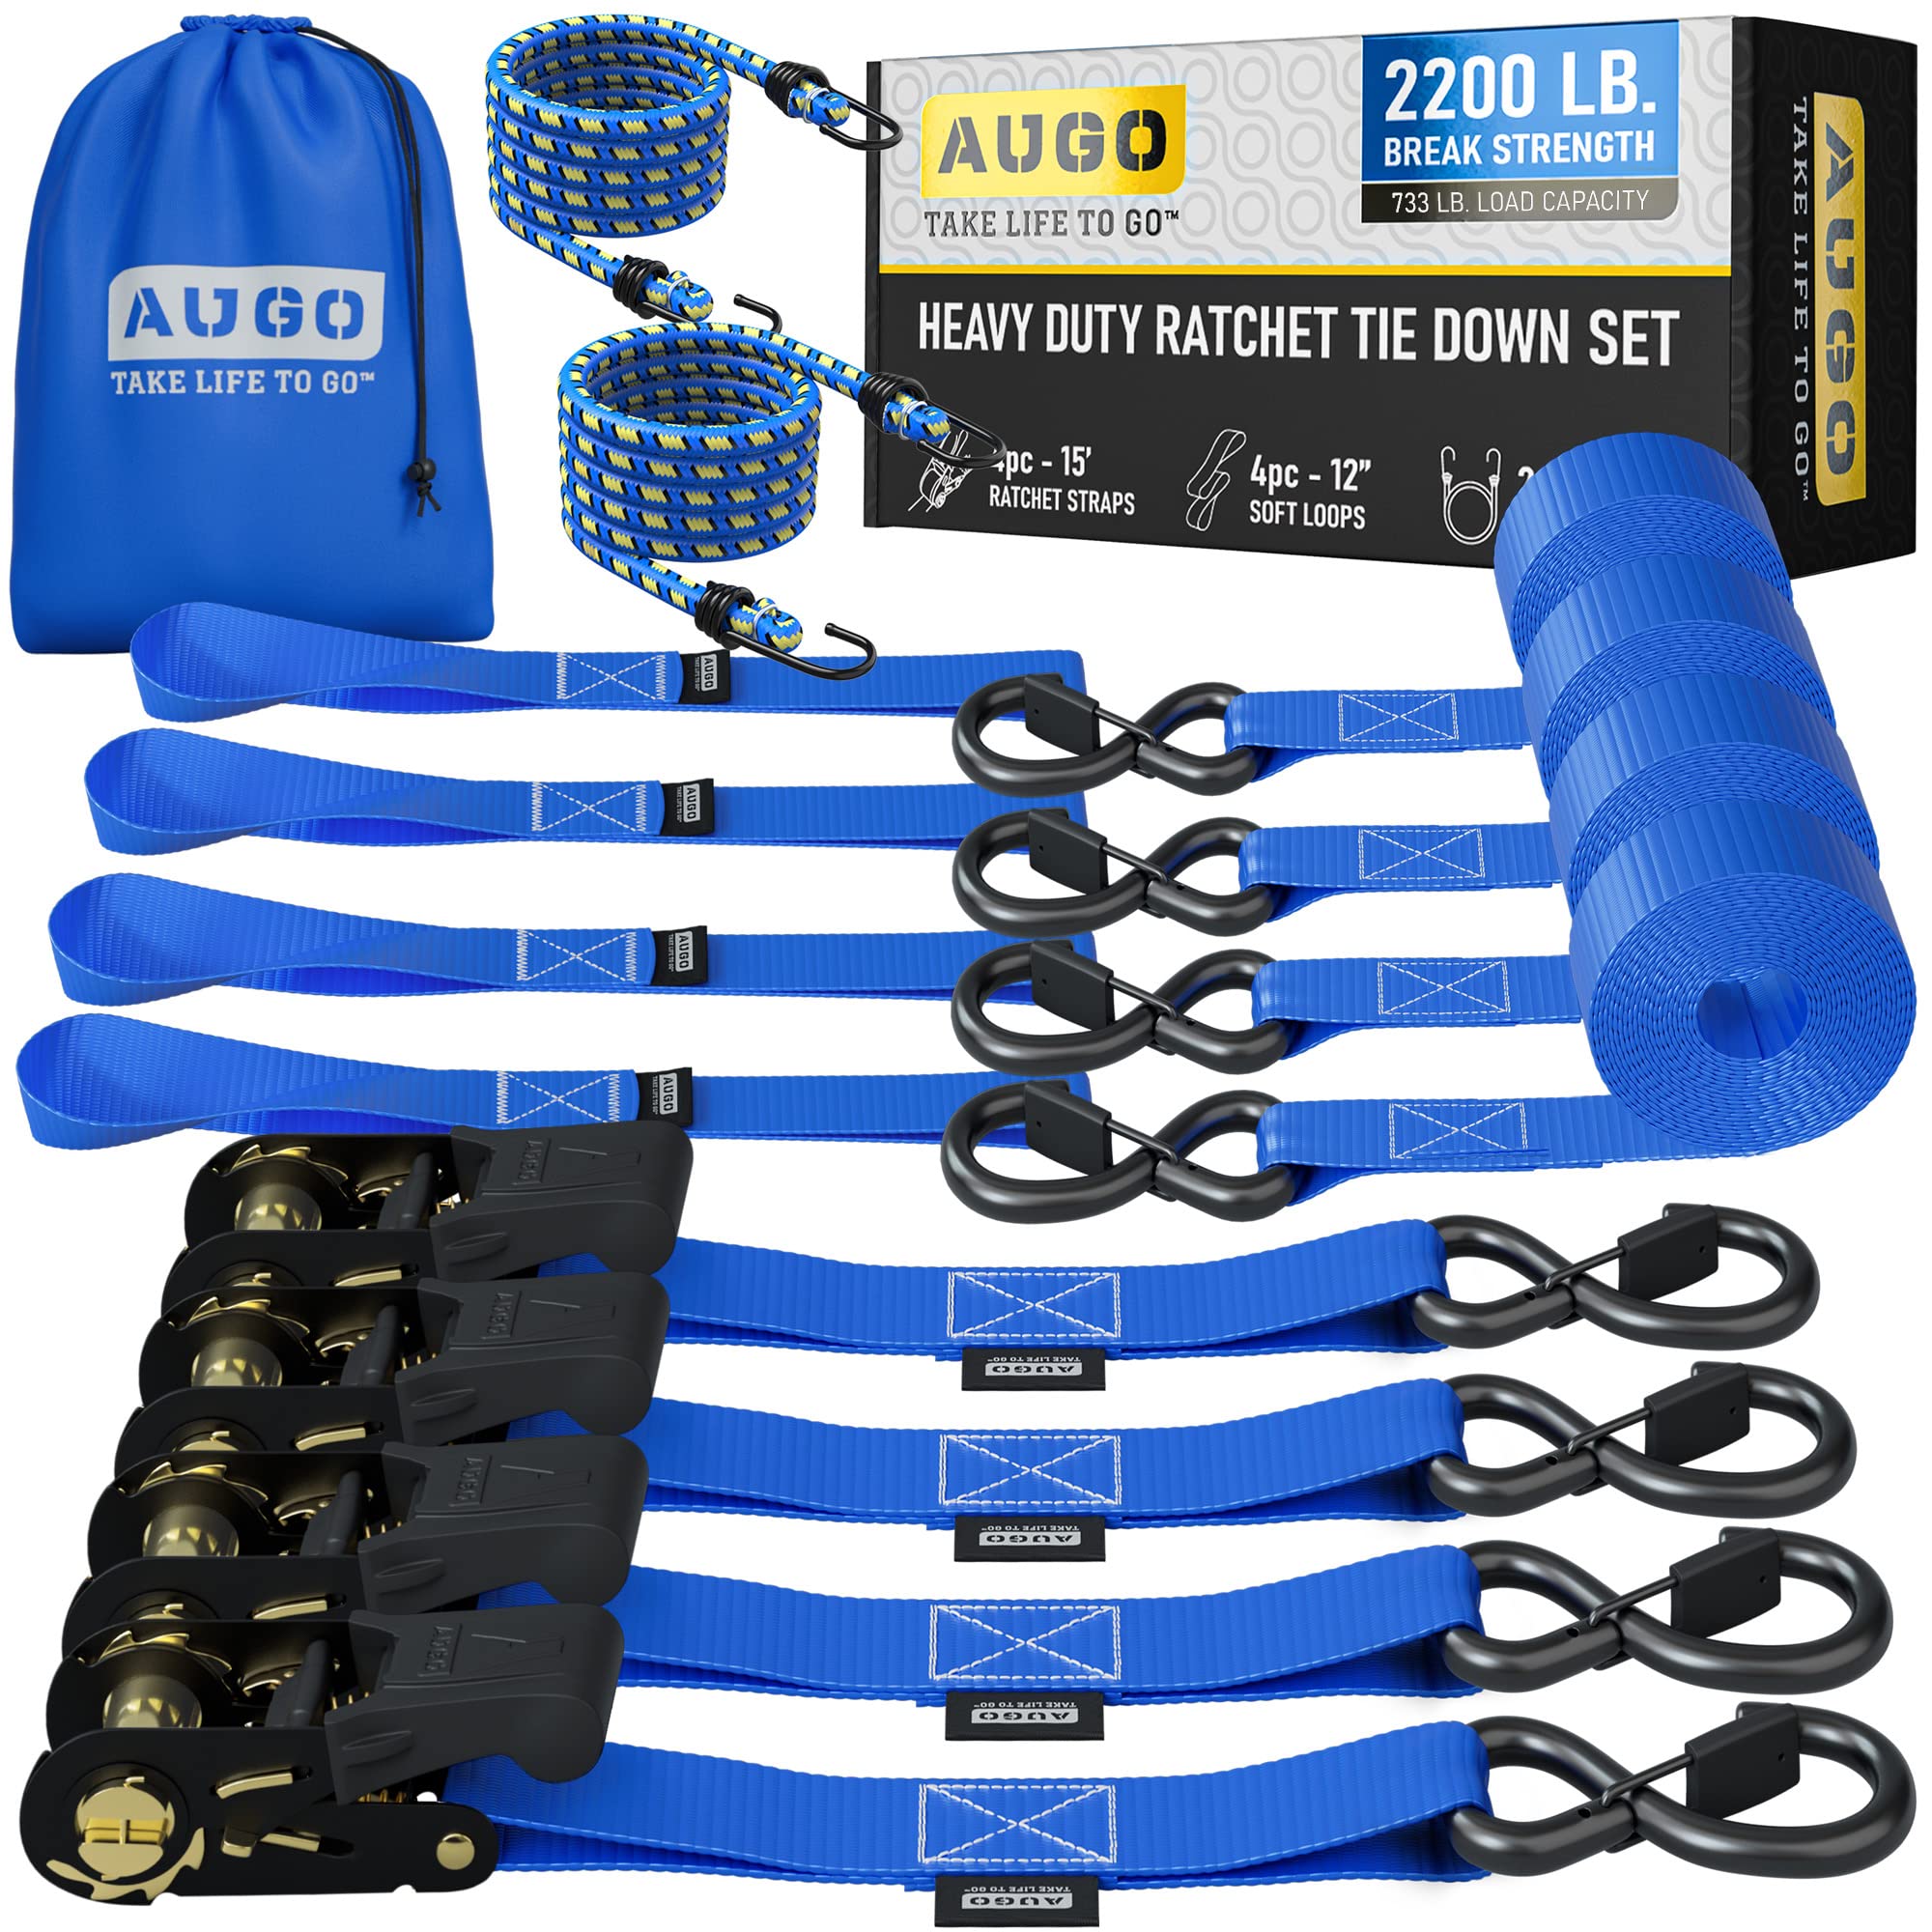 AUGO Ratchet Tie Down Straps -4 PK- 15 FT 2,200 LB Break Strength  Safety Lock S Hooks -for Moving Cargo, Appliances, Lawn Equipment,  Motorcycle Includes Bungee Cords, Soft Loops, Storage Bag 